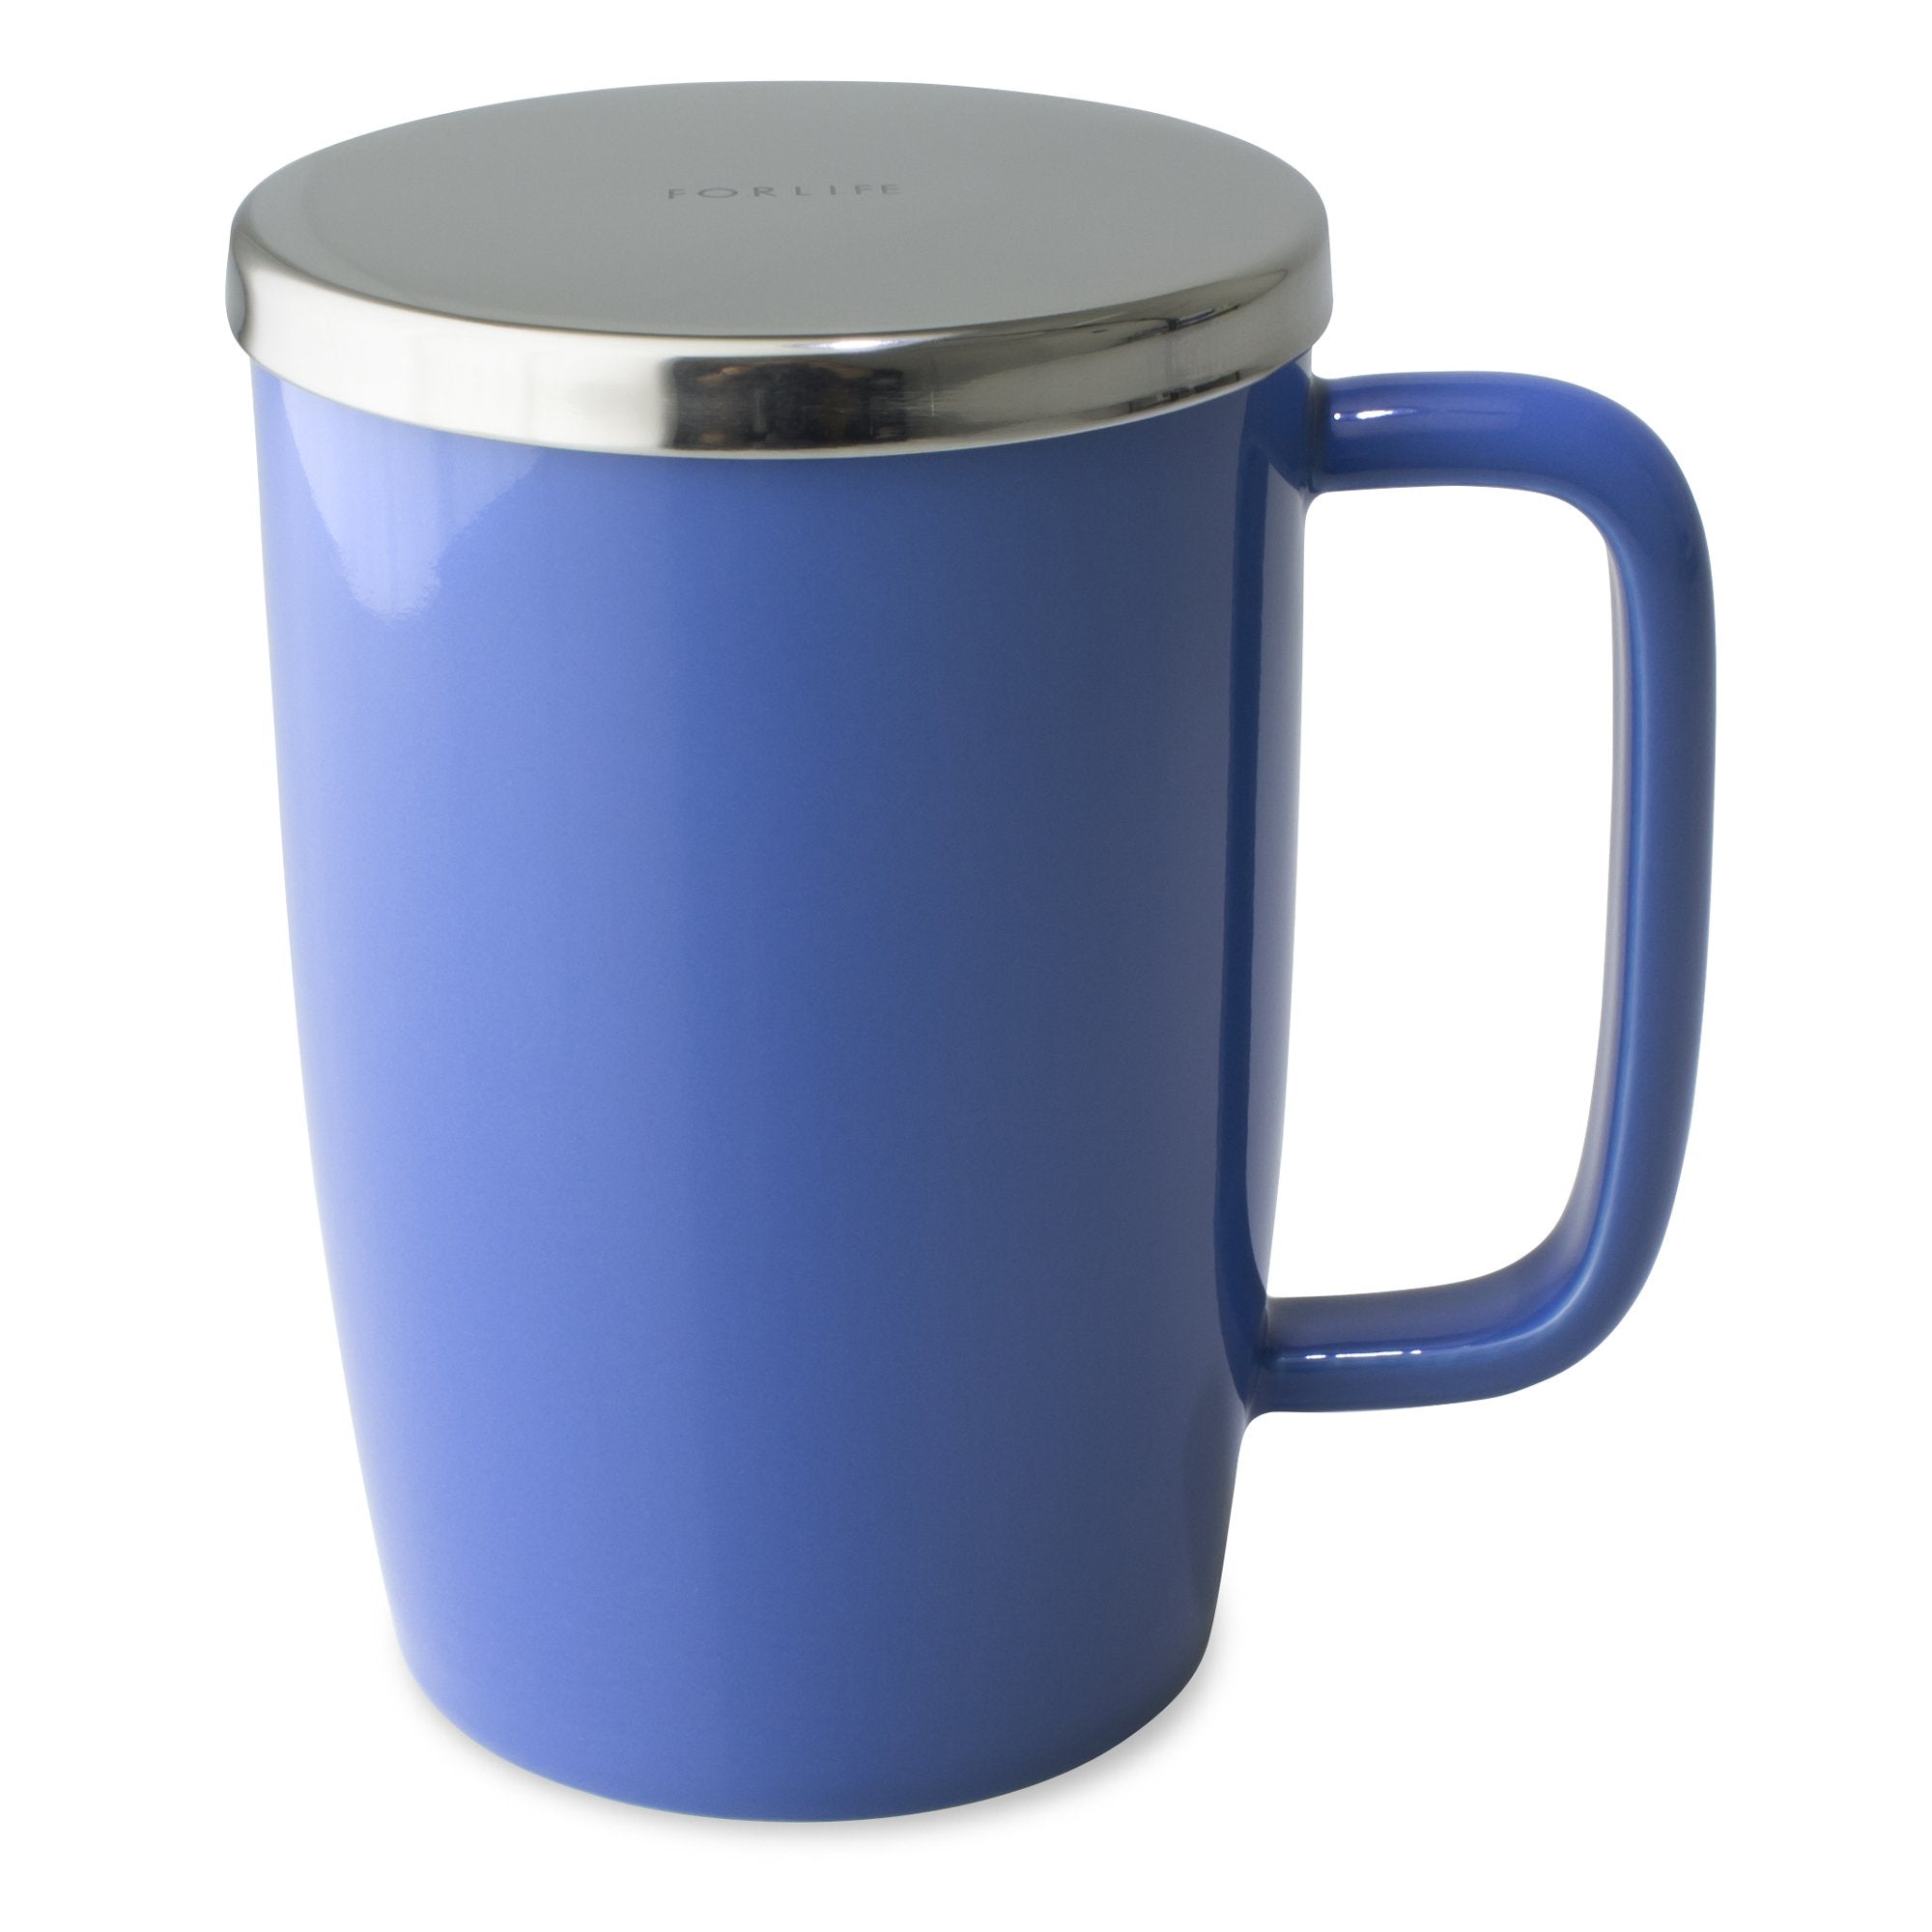 TeaLula 18 oz blue colored glossy surface finish mug with large thin rectangle handle and shiny stainless steel lid